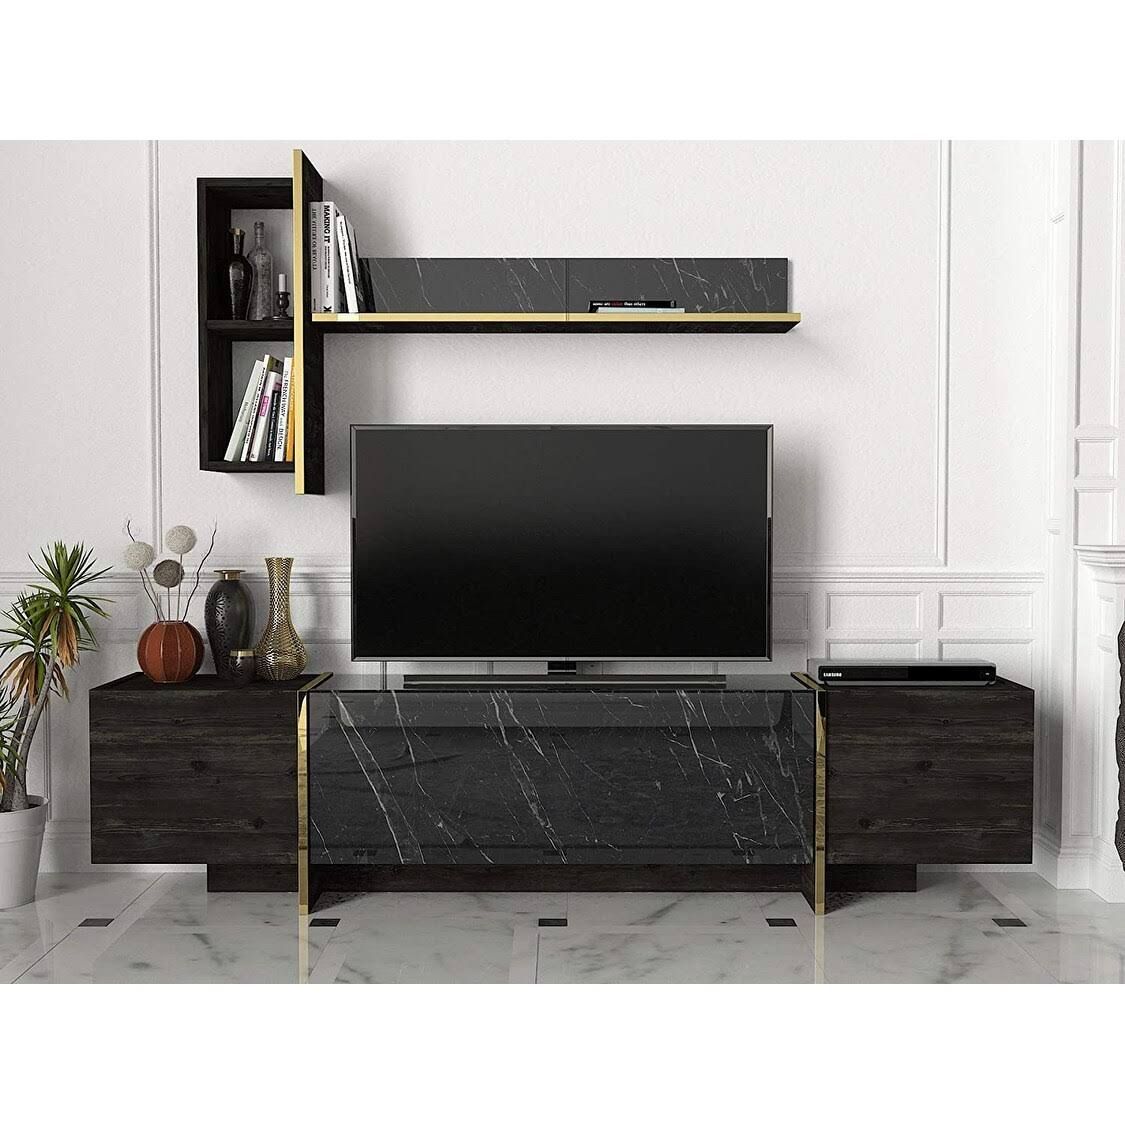 Sayre Furniture Veyron Tv Unit Black Rebab Black Marble – Wgl 1 S Pertaining To Black Marble Tv Stands (Gallery 3 of 20)